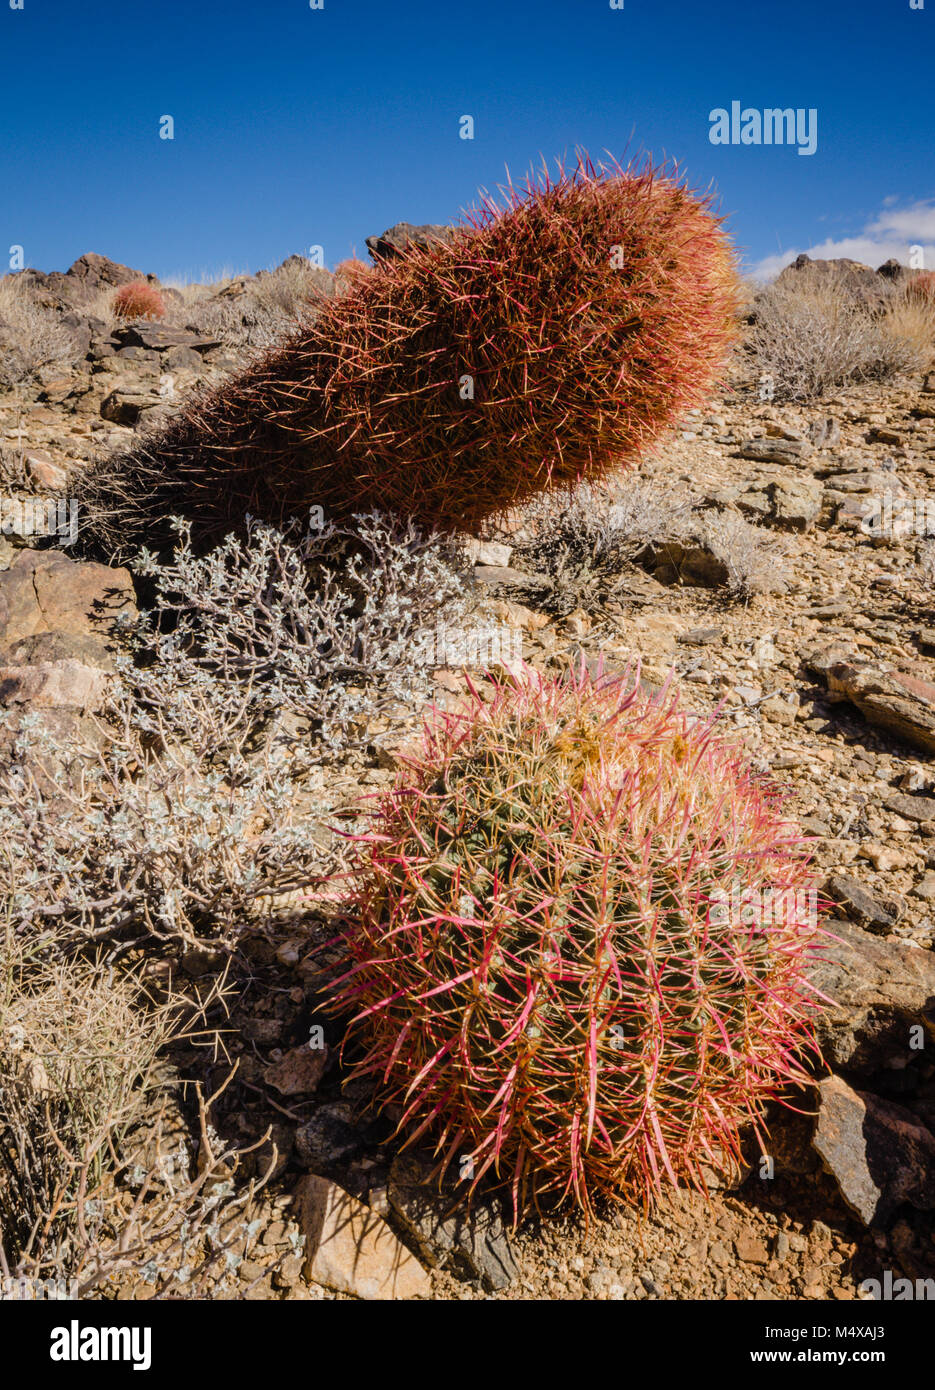 Ferocactus cylindraceus is a species of barrel cactus which is known by several common names, including California barrel cactus. Stock Photo